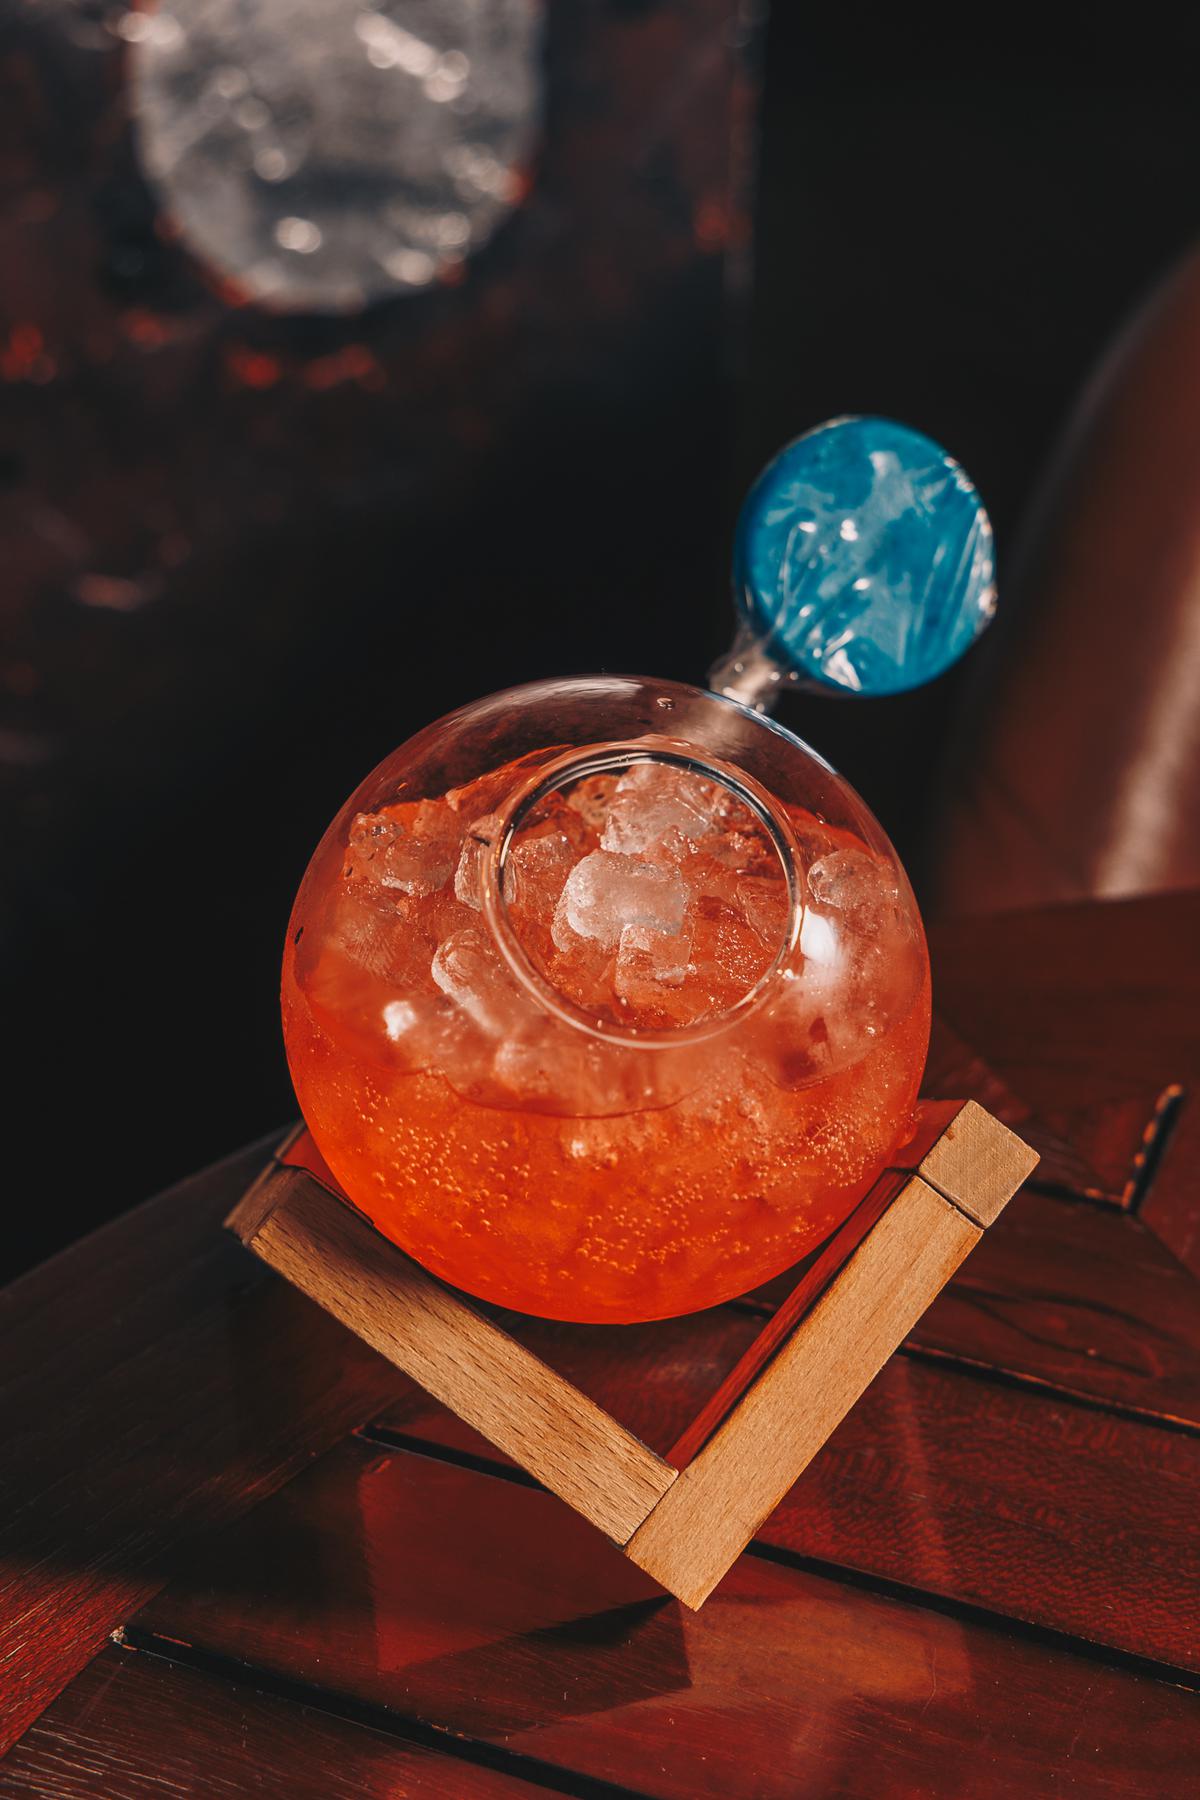 Solaris, a cocktail presented by COYA